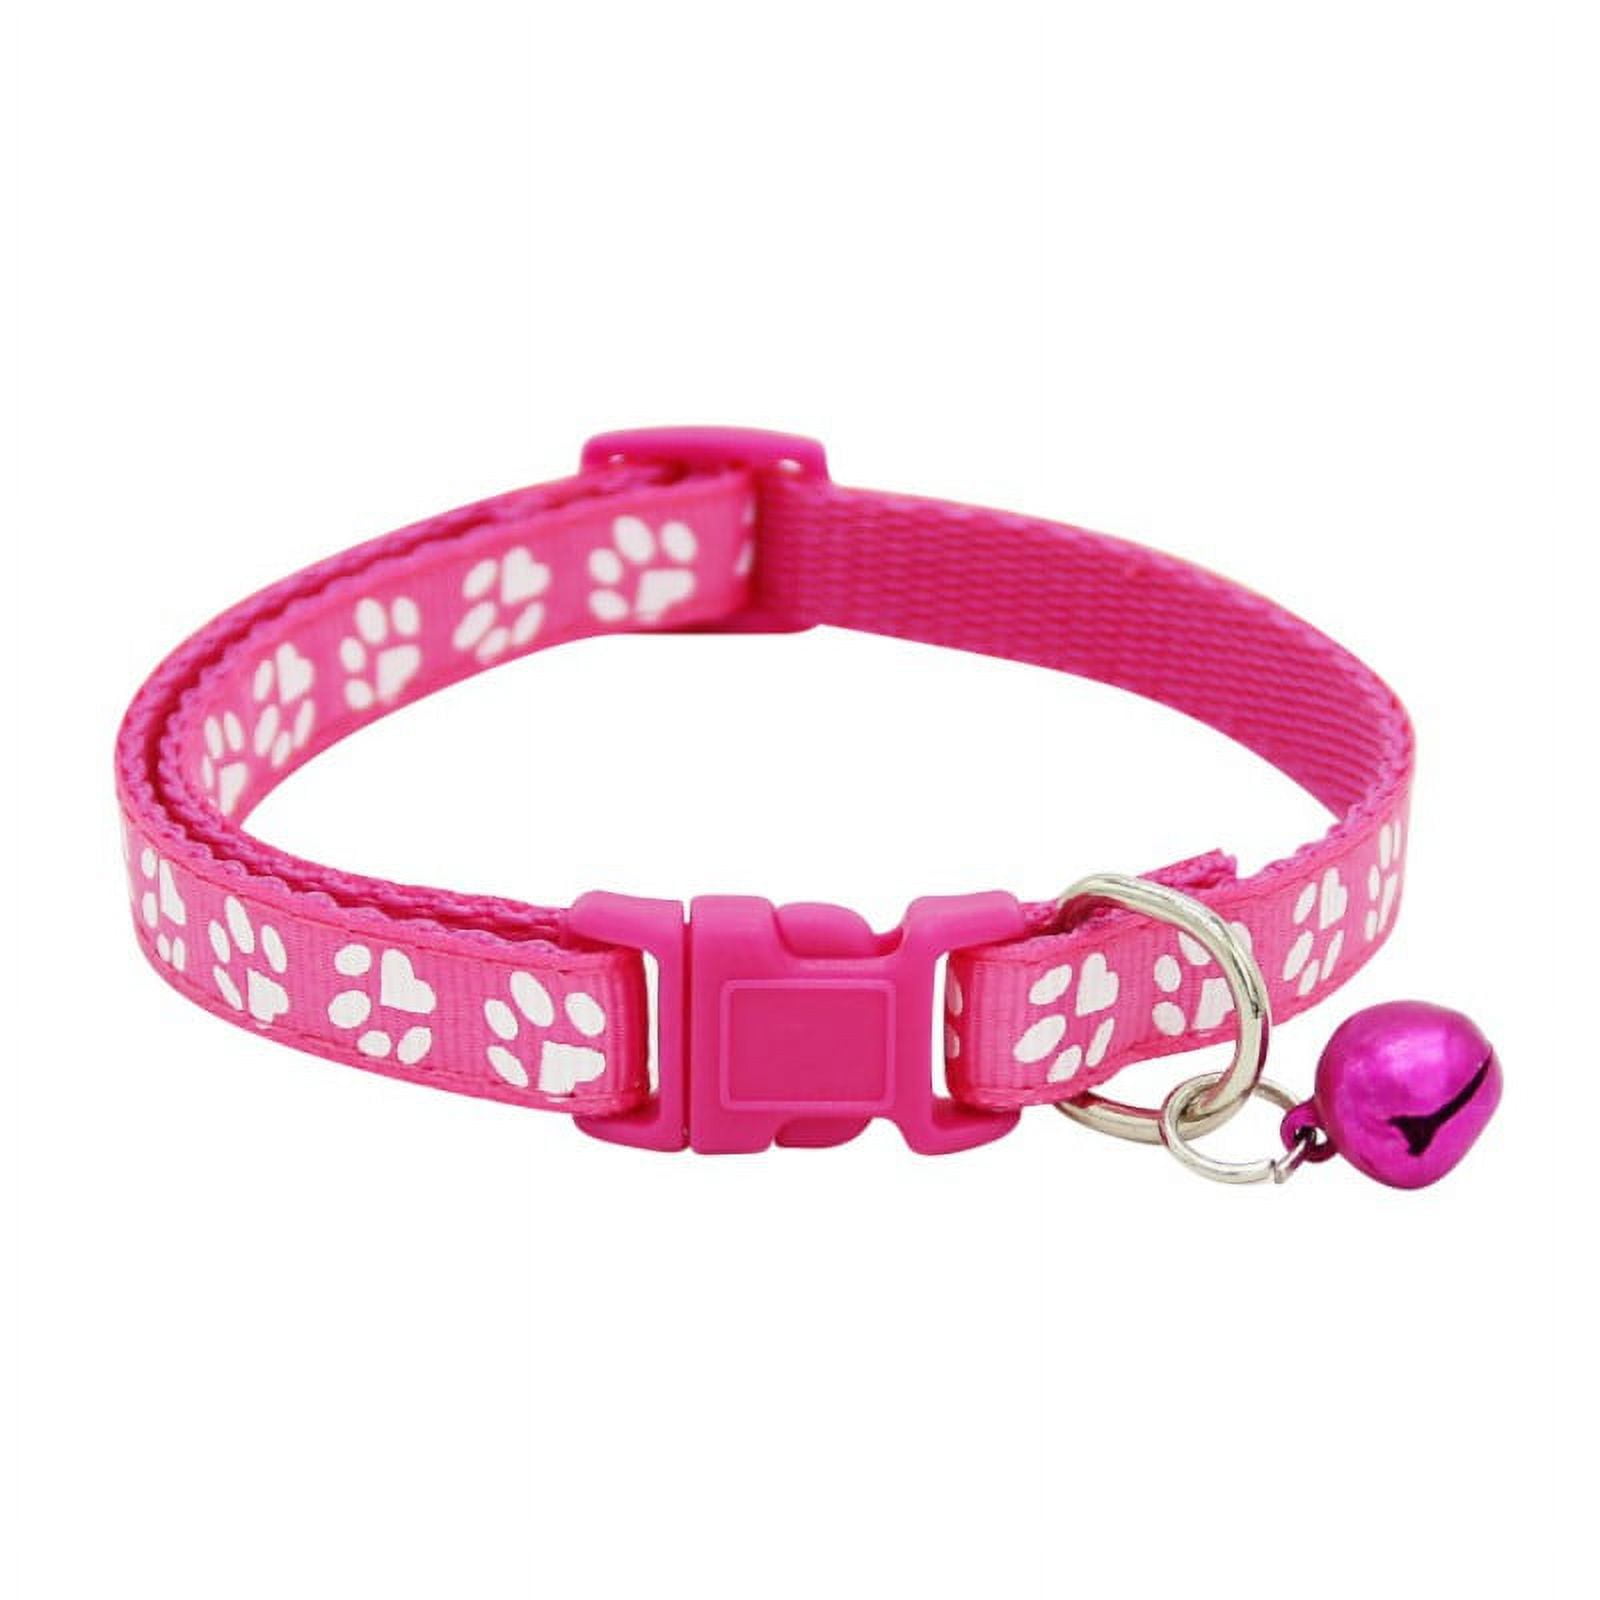 Candy Color Cat Bell Leather Collar Pet Dog Puppy Kitten Cute Loud collar